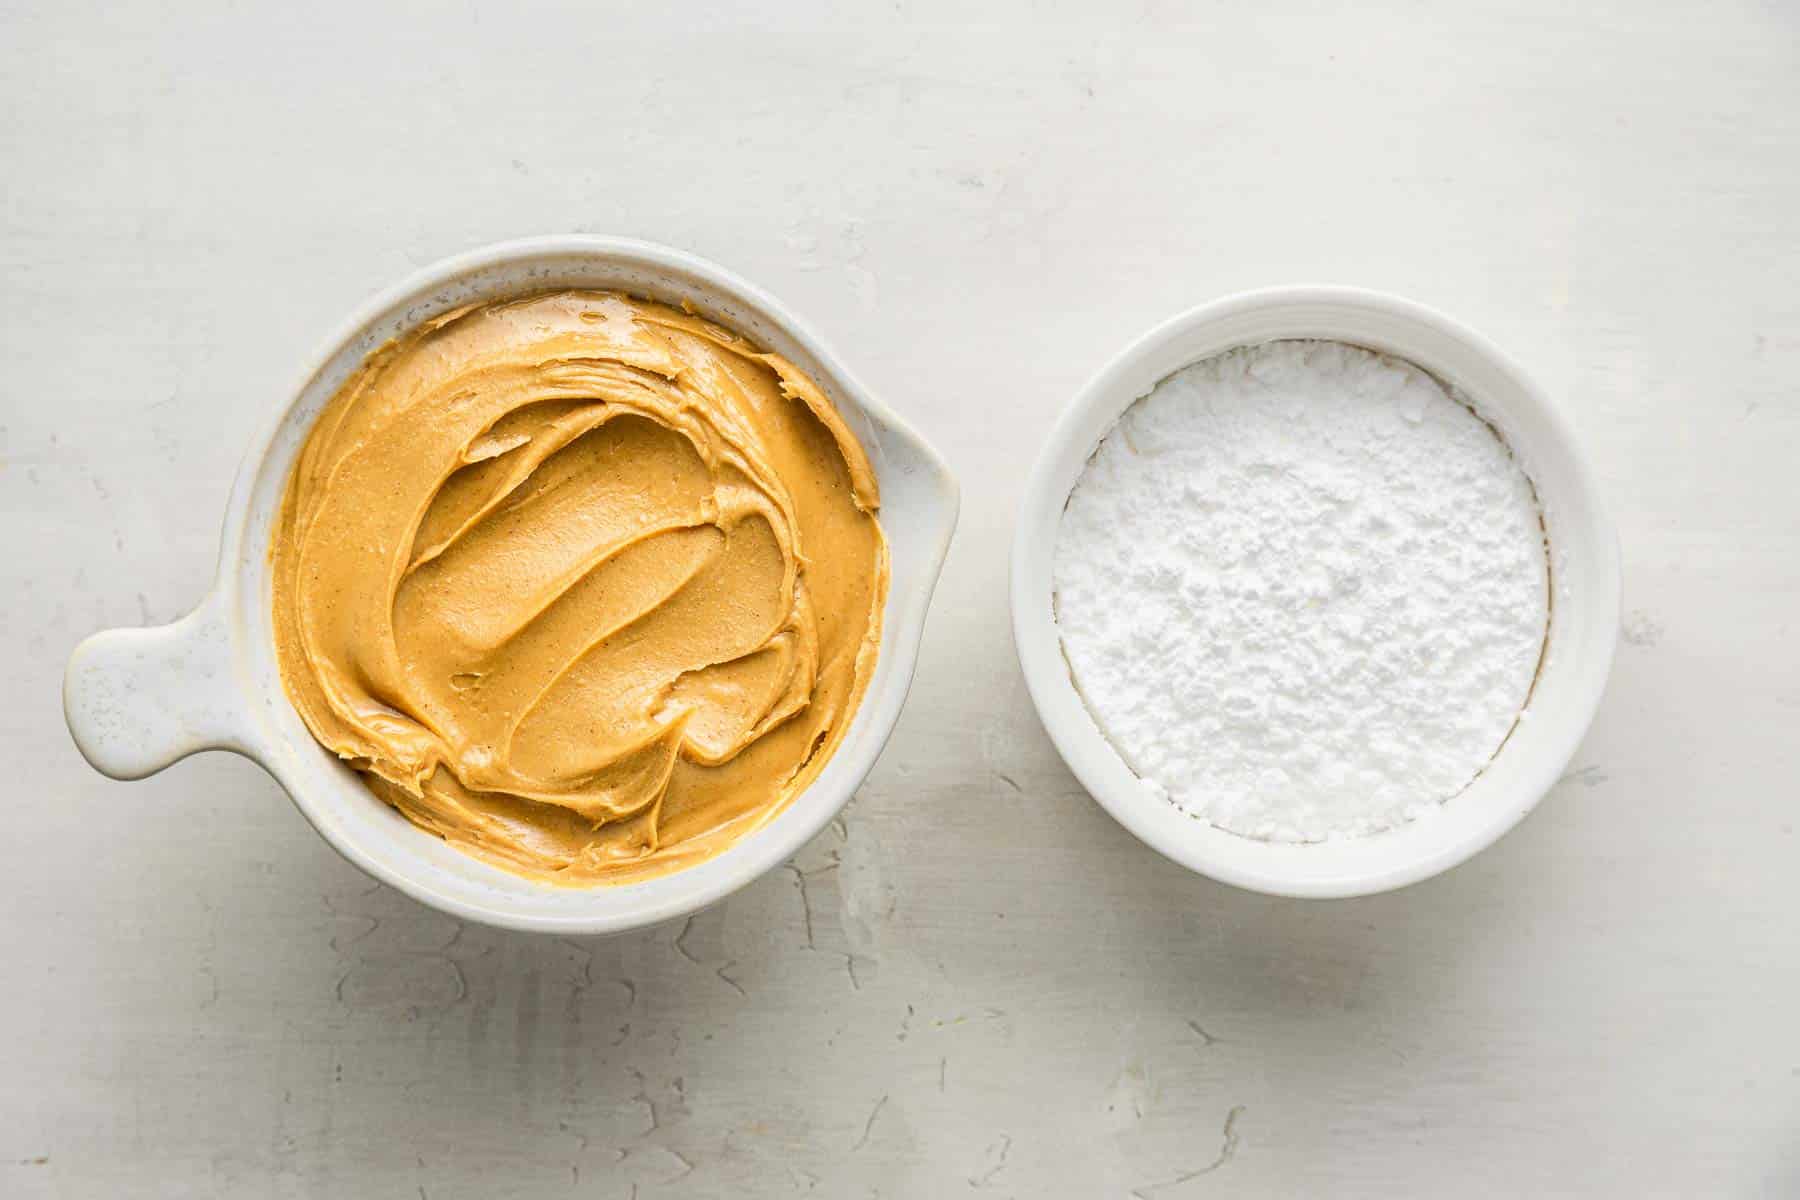 A bowl of peanut butter next to a bowl of powdered sugar.